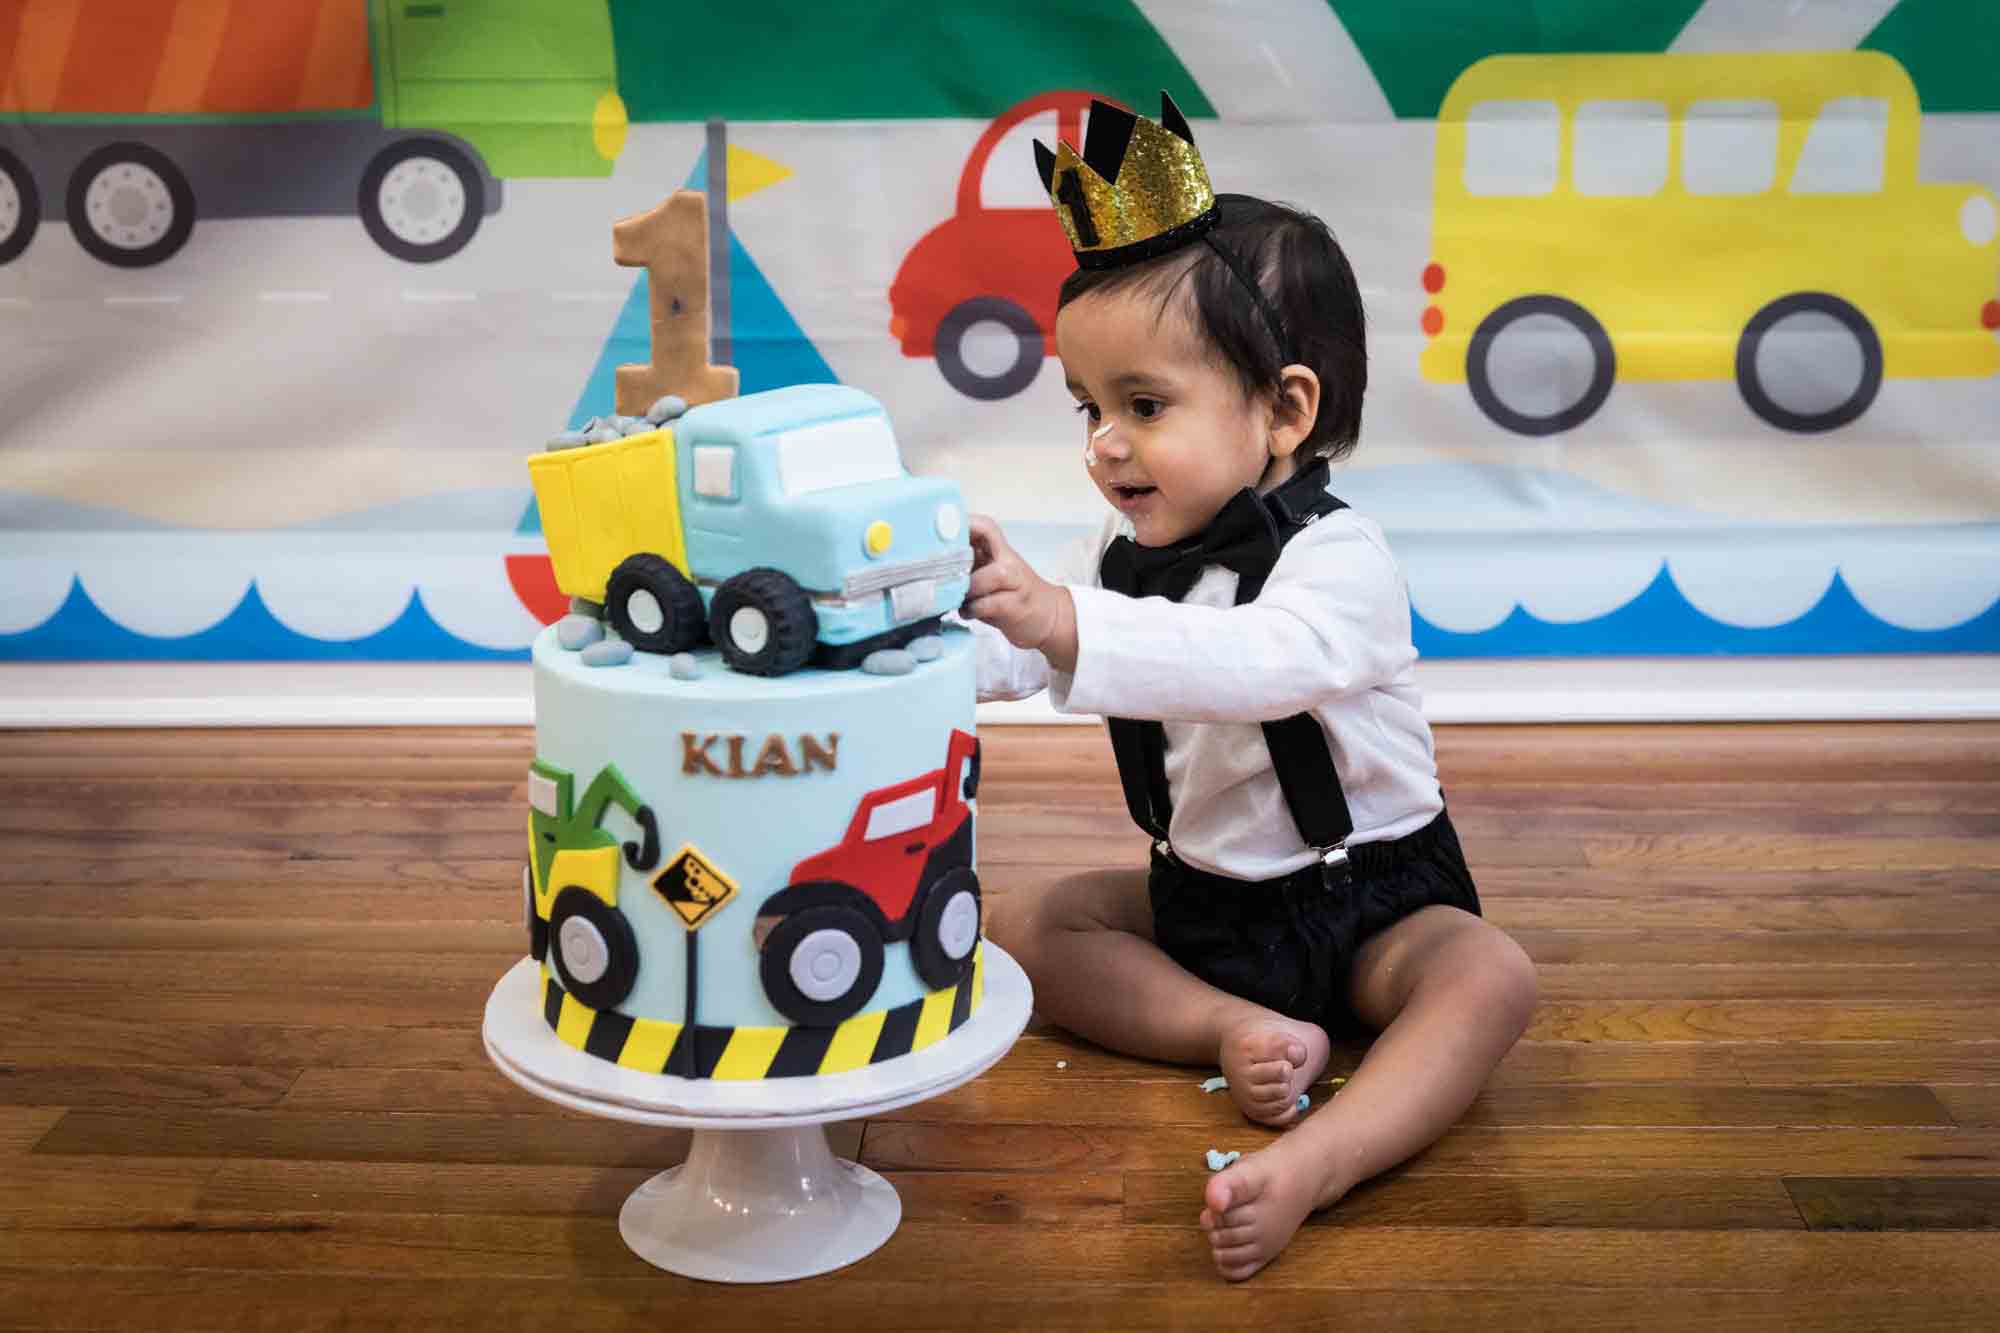 Little boy sitting on wooden floor touching truck-themed cake wearing gold crown and black bow tie for an article on cake smash tips